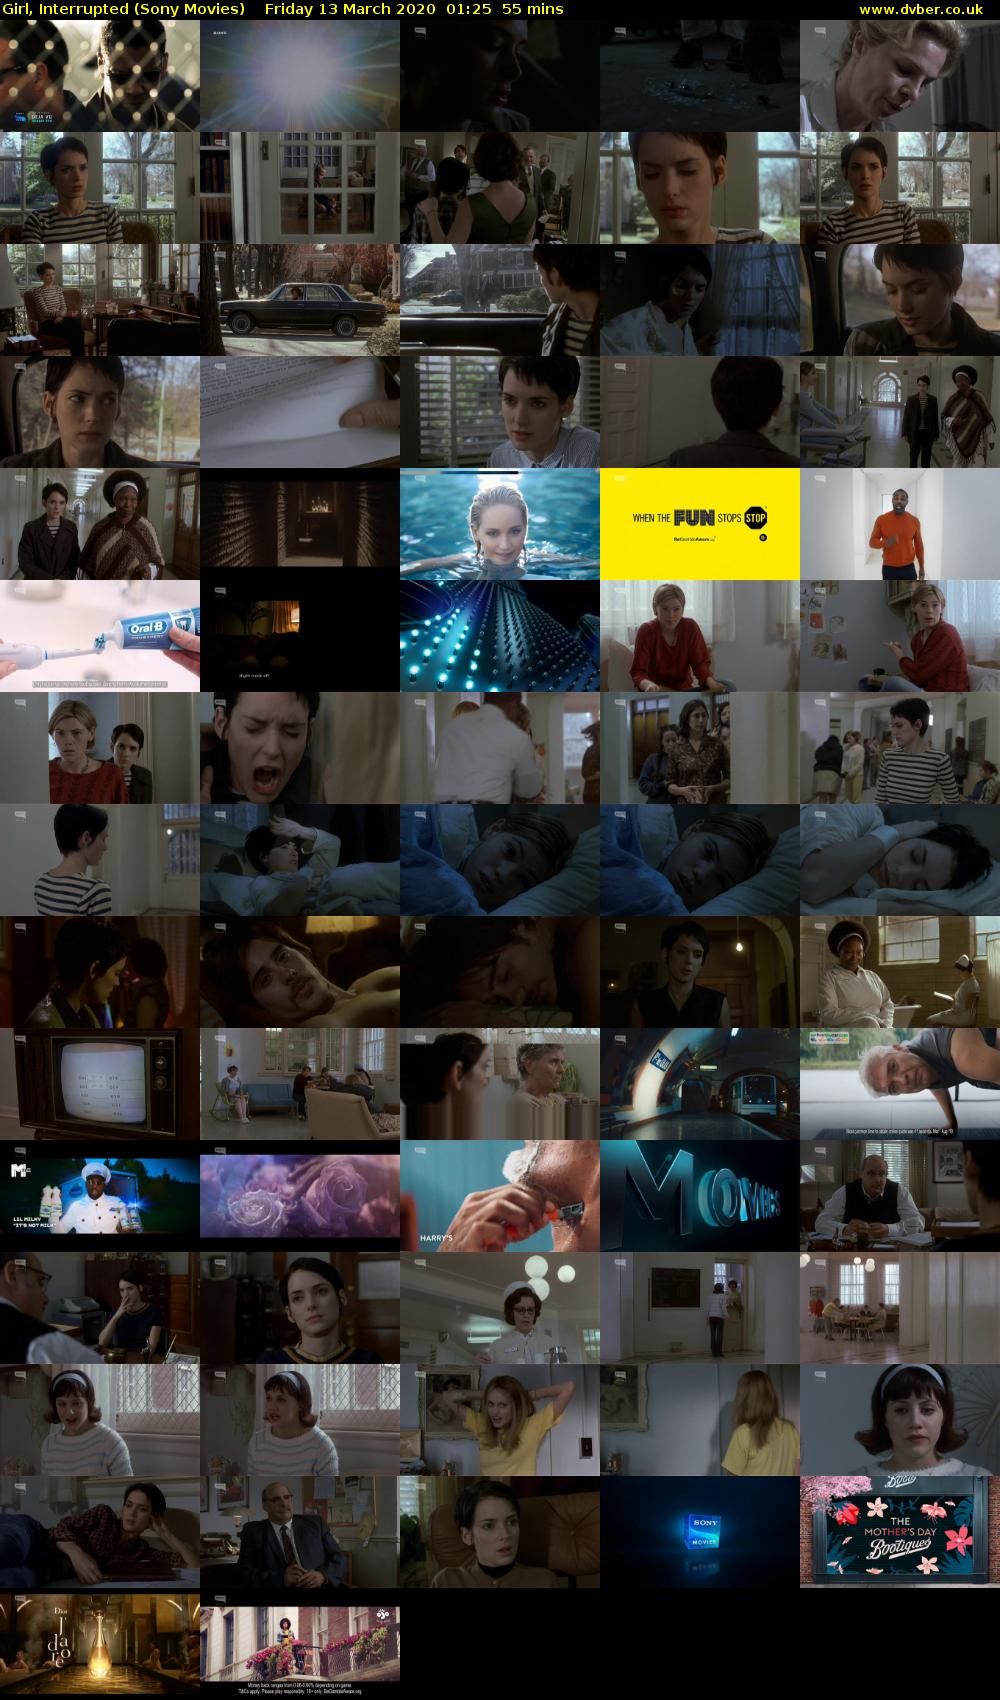 Girl, Interrupted (Sony Movies) Friday 13 March 2020 01:25 - 02:20